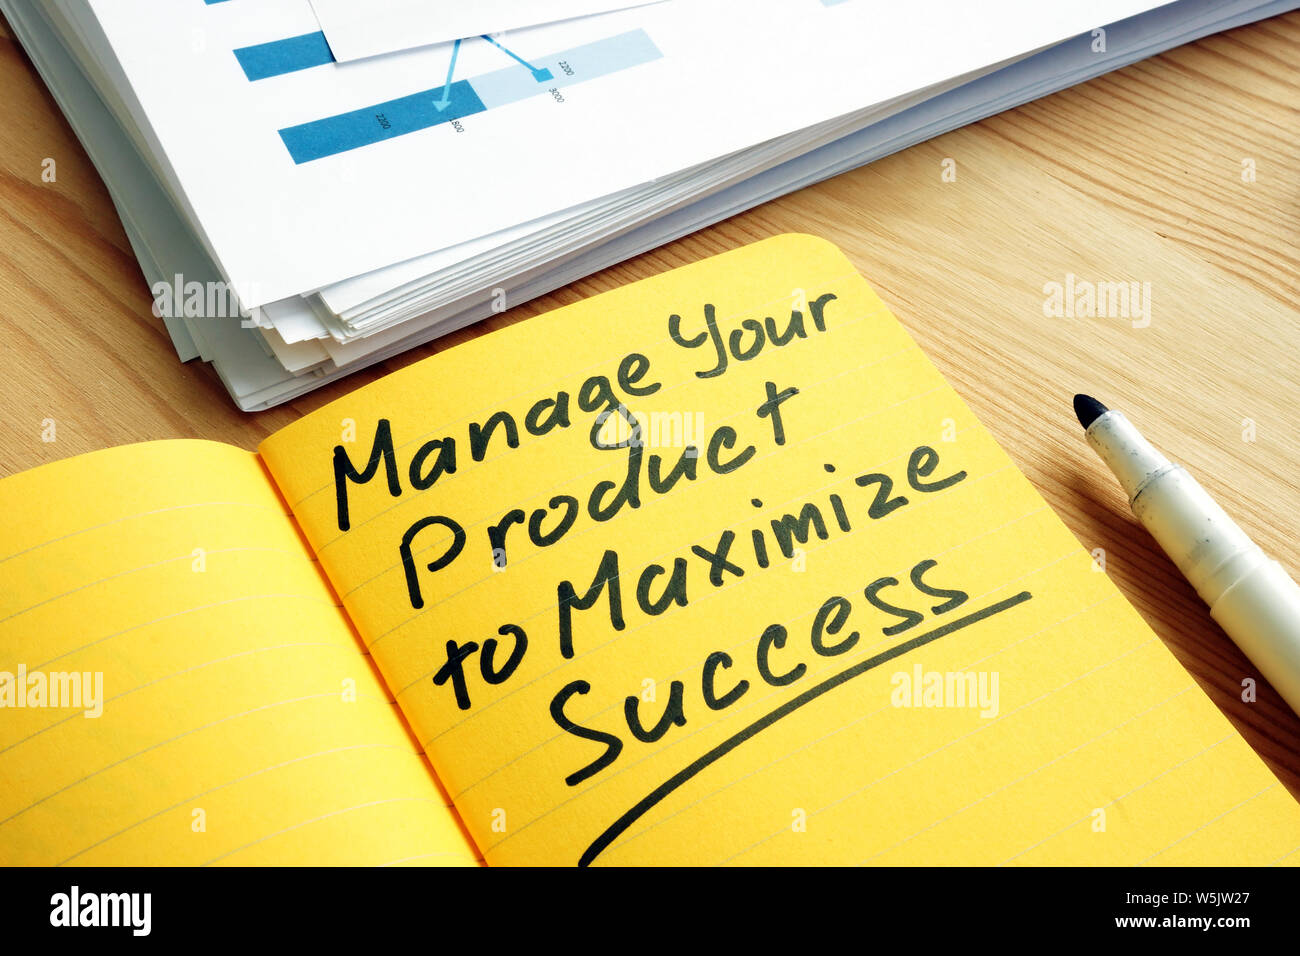 The product life cycle concept. Manage your product to maximize success. Stock Photo